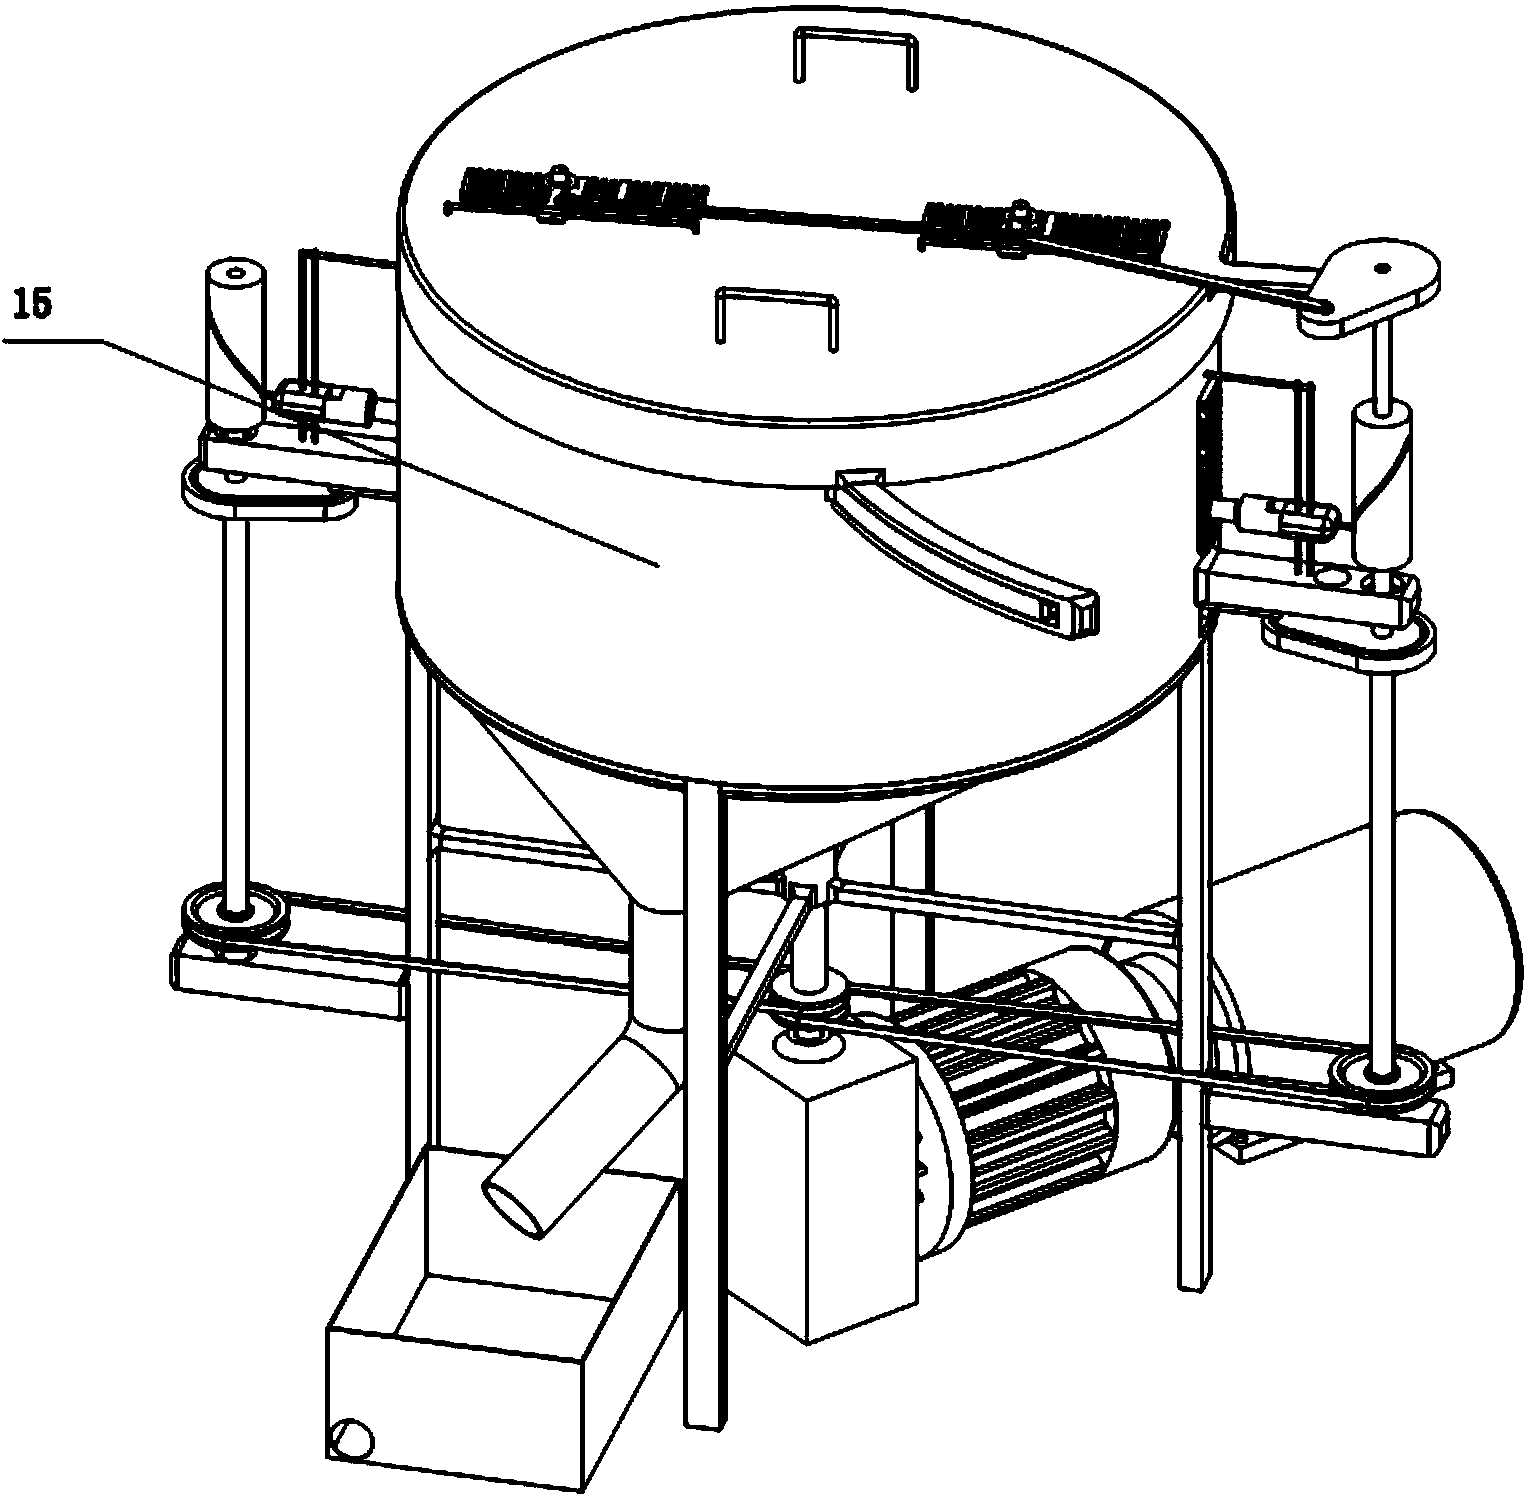 Tire recycling device for smashing waste tire based on high-pressure water jet